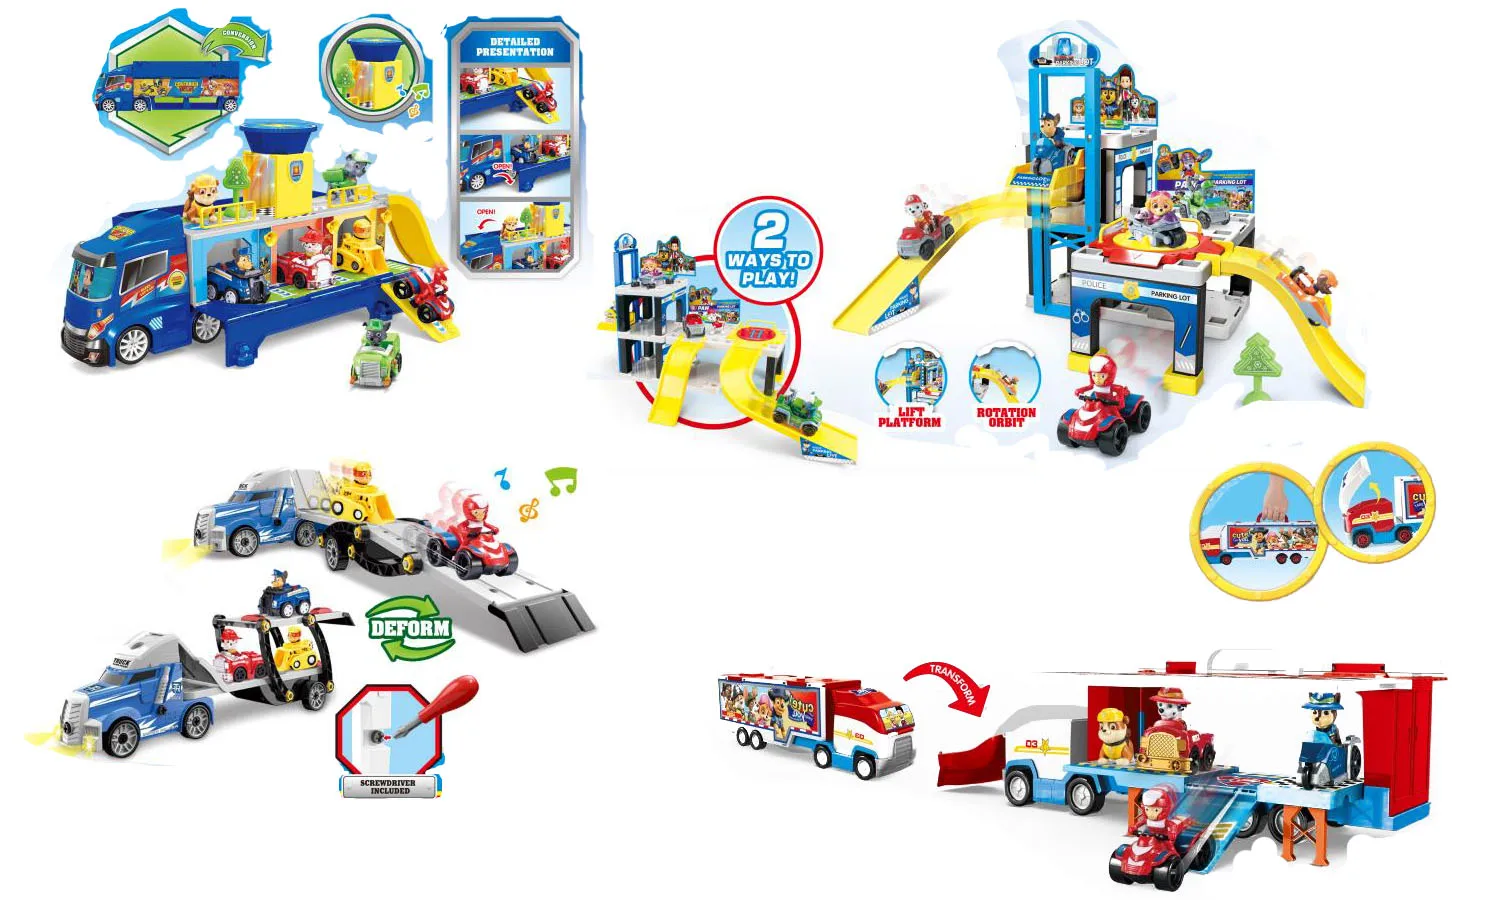 

Paw Patrol Car Motorboat Bus Lookout Tower Park with Music Patrulla Canina Psi Patrol Car Action Figures Toys for Children Gifts